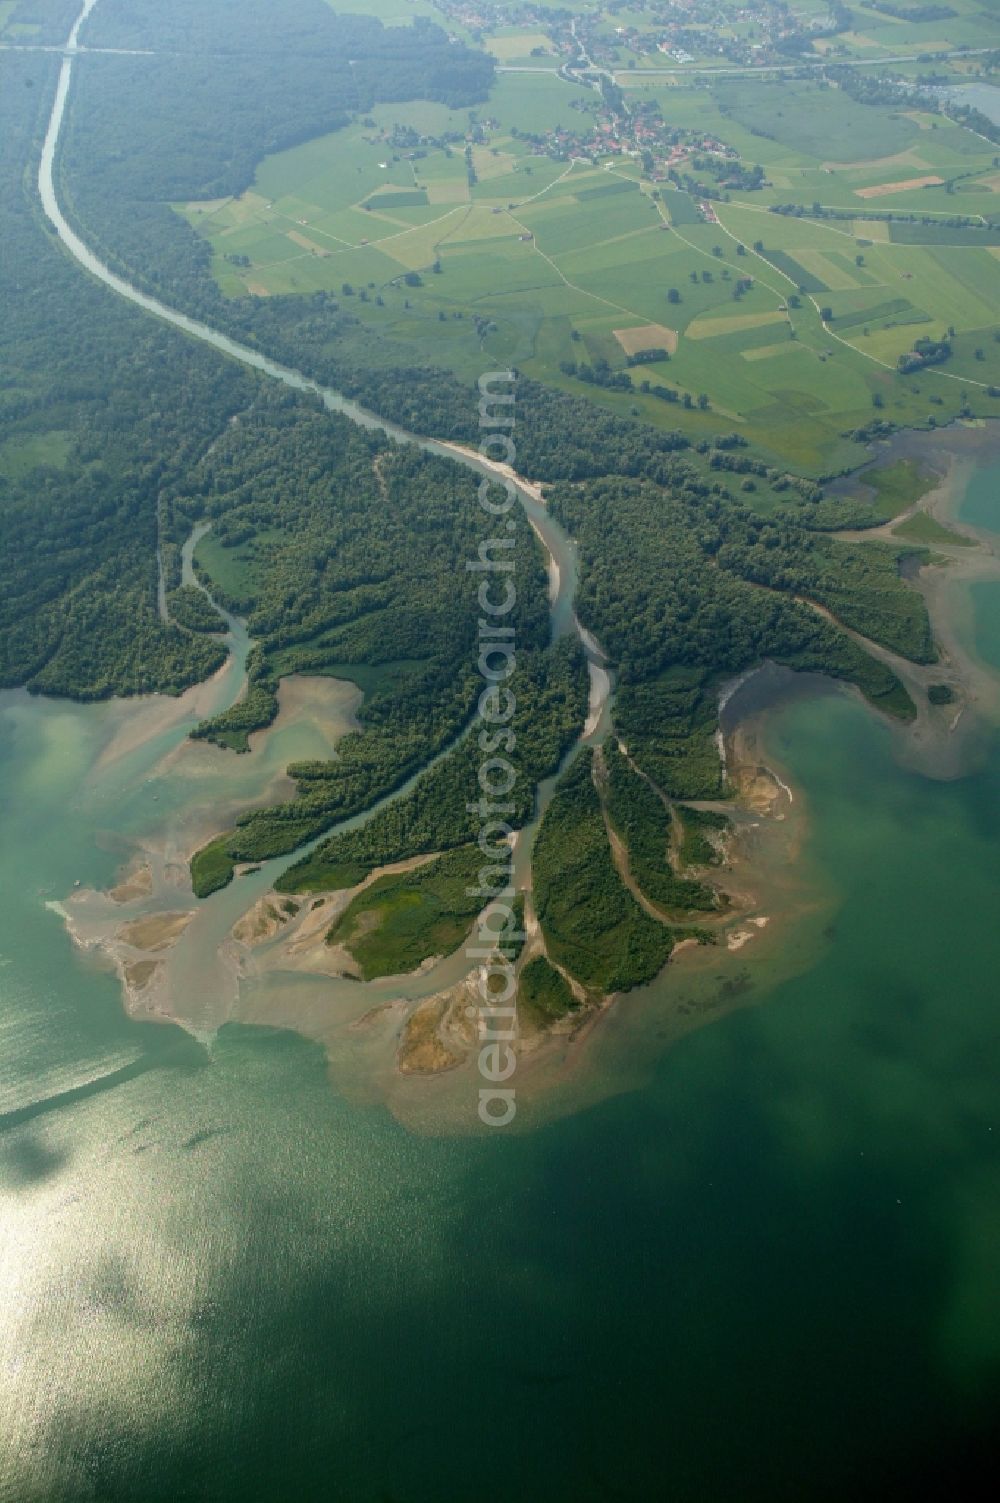 Übersee from the bird's eye view: Estuary of the Tiroler Ache in Uebersee in Bavaria. It rises at the Thurn Pass and flows into the Chiemseeat Grabenstaett